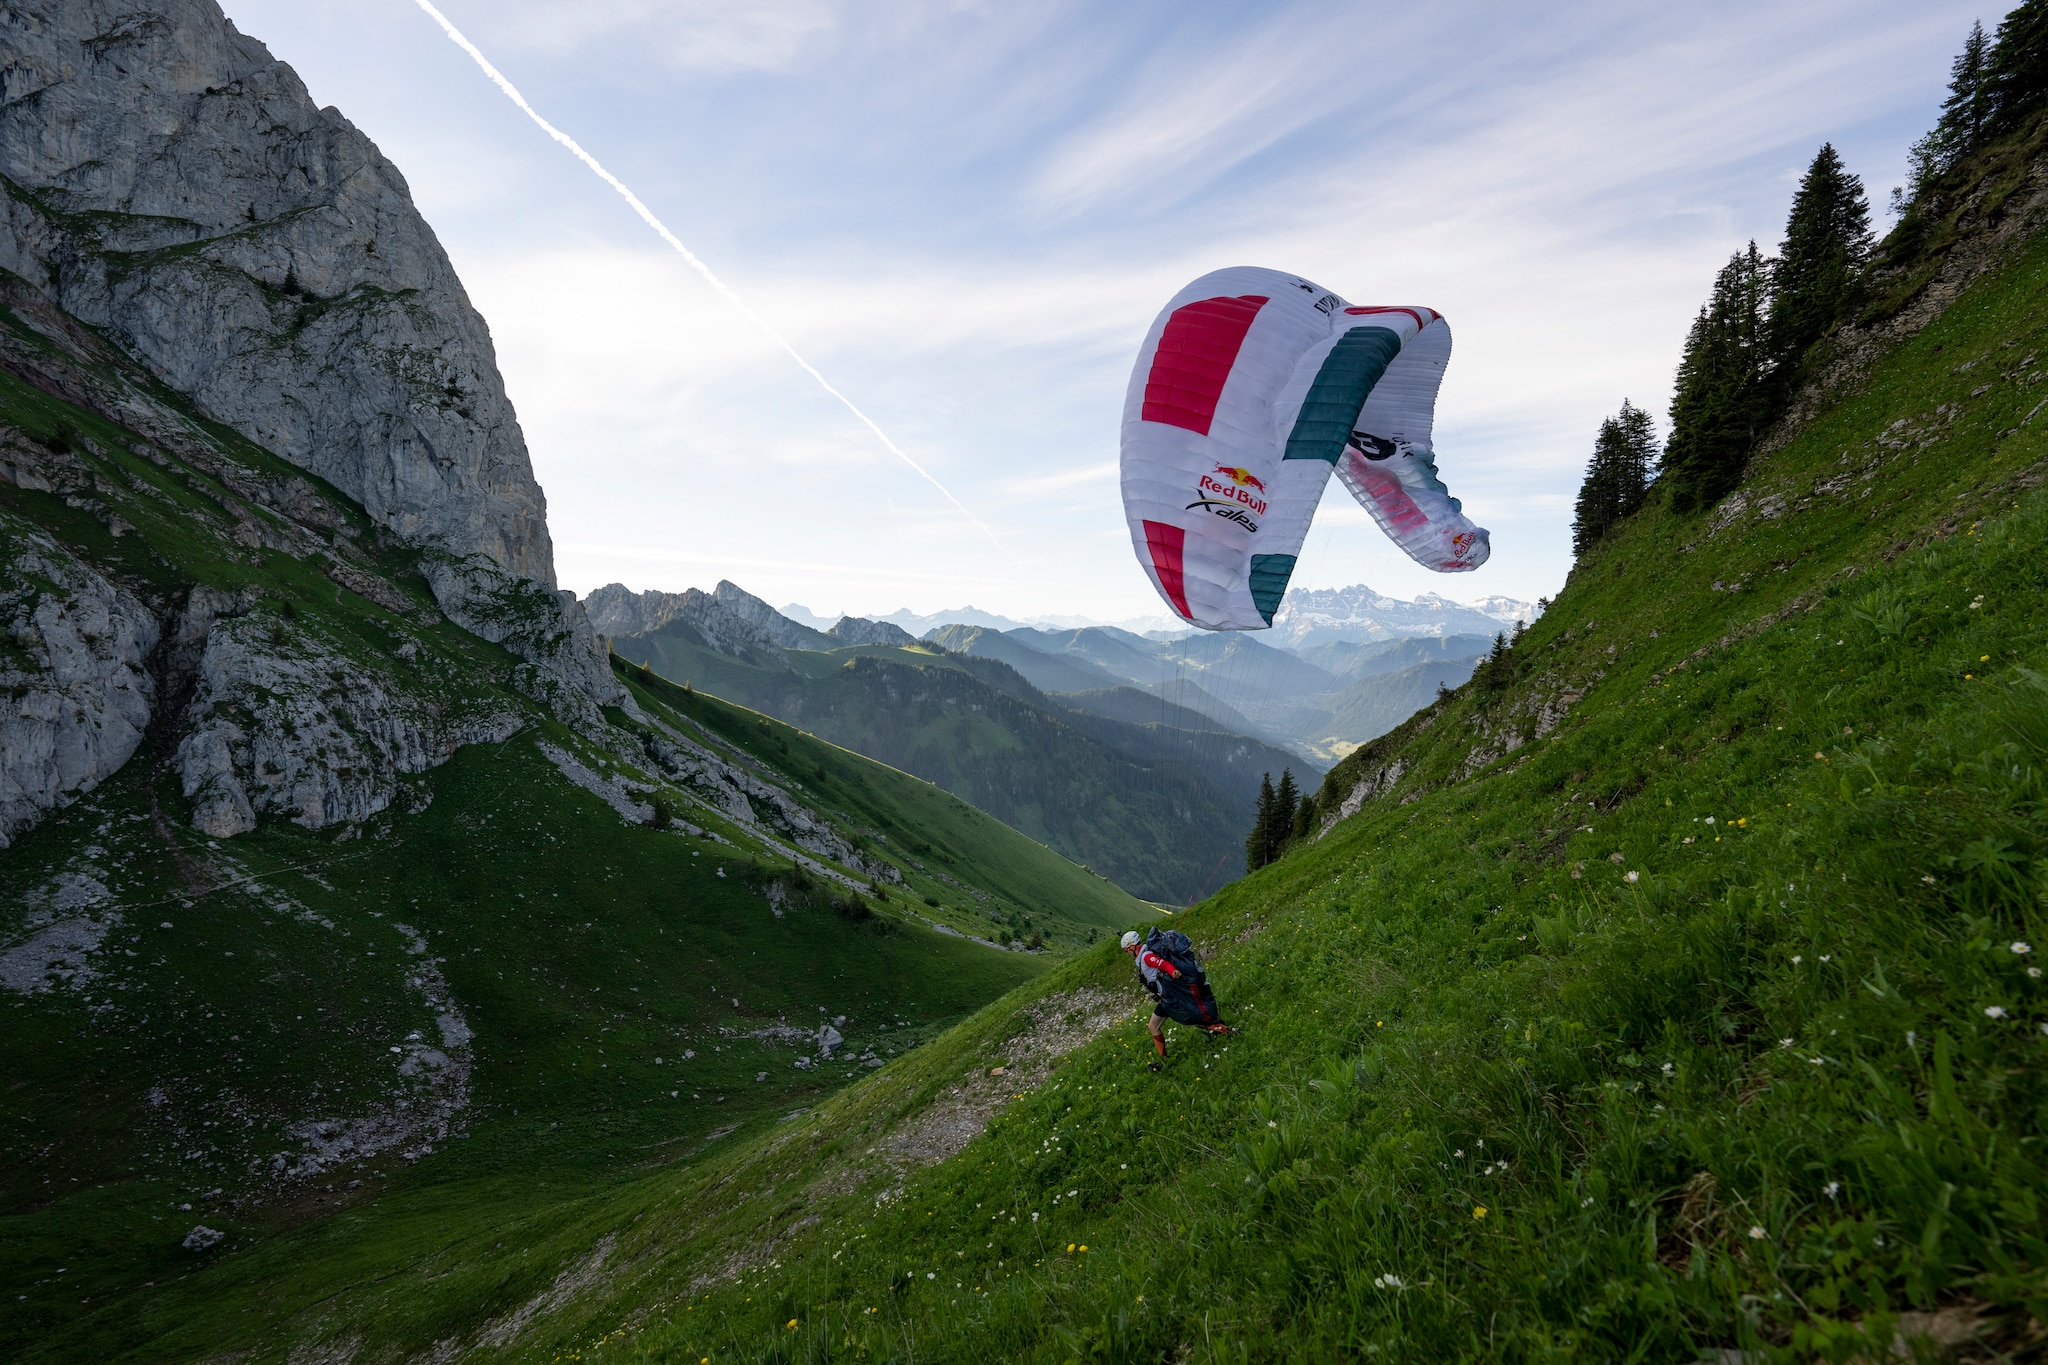 AUT2 performs during the Red Bull X-Alps in Chatel, France on June 26, 2021.